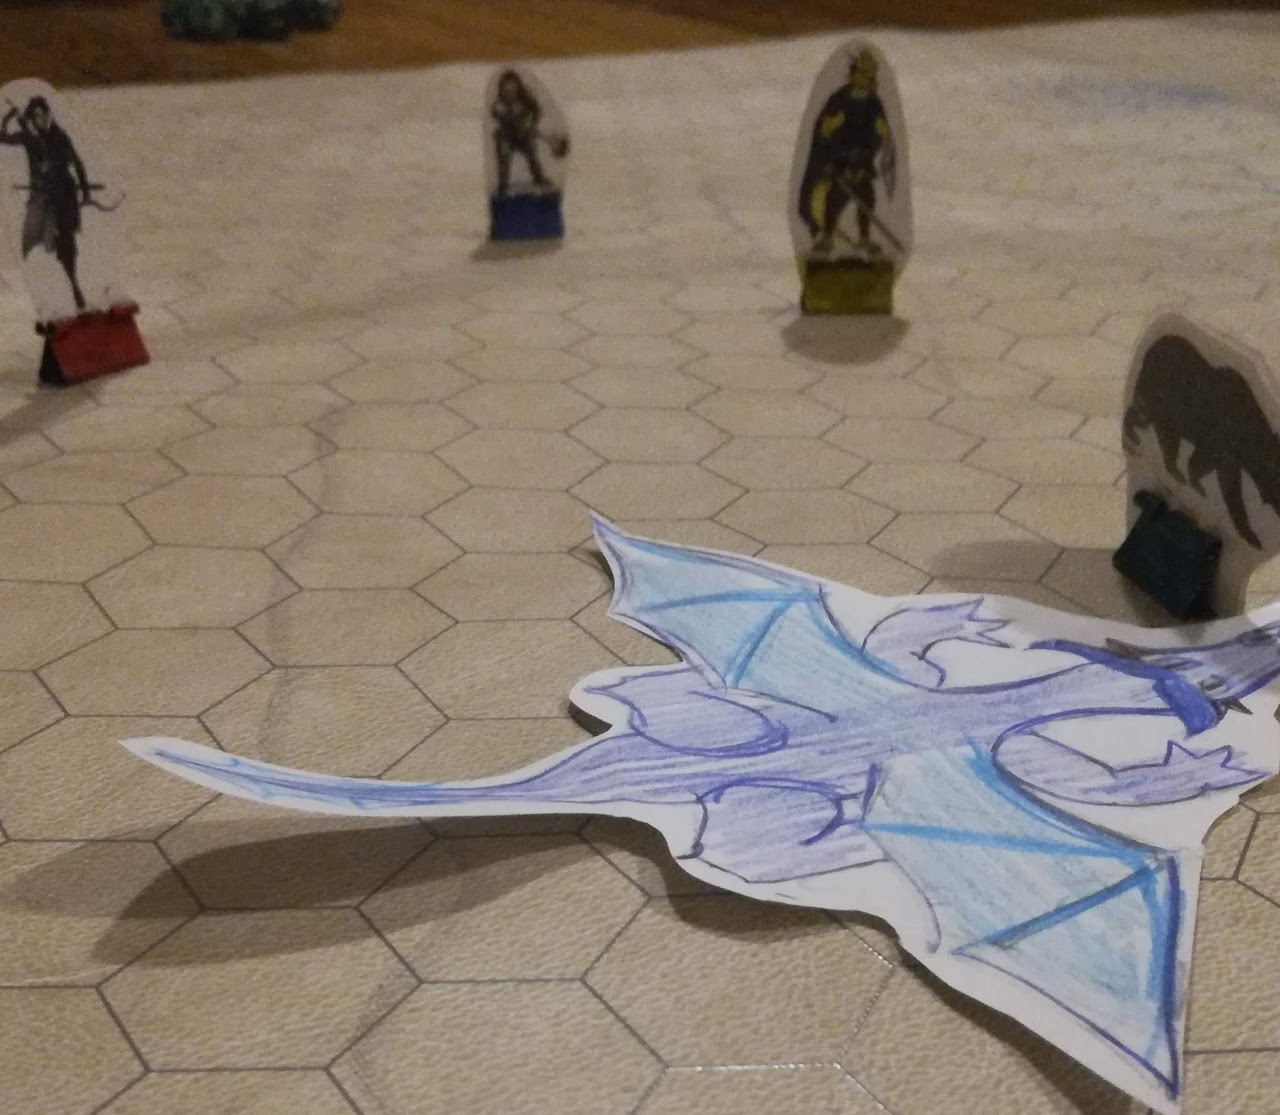 Slanted view of a Dungeons and Dragons map, with several miniatures (including a dwarf, a dragonborn, a bear, and a rogue half-elf) surrounding a paper cutout of a blue dragon.